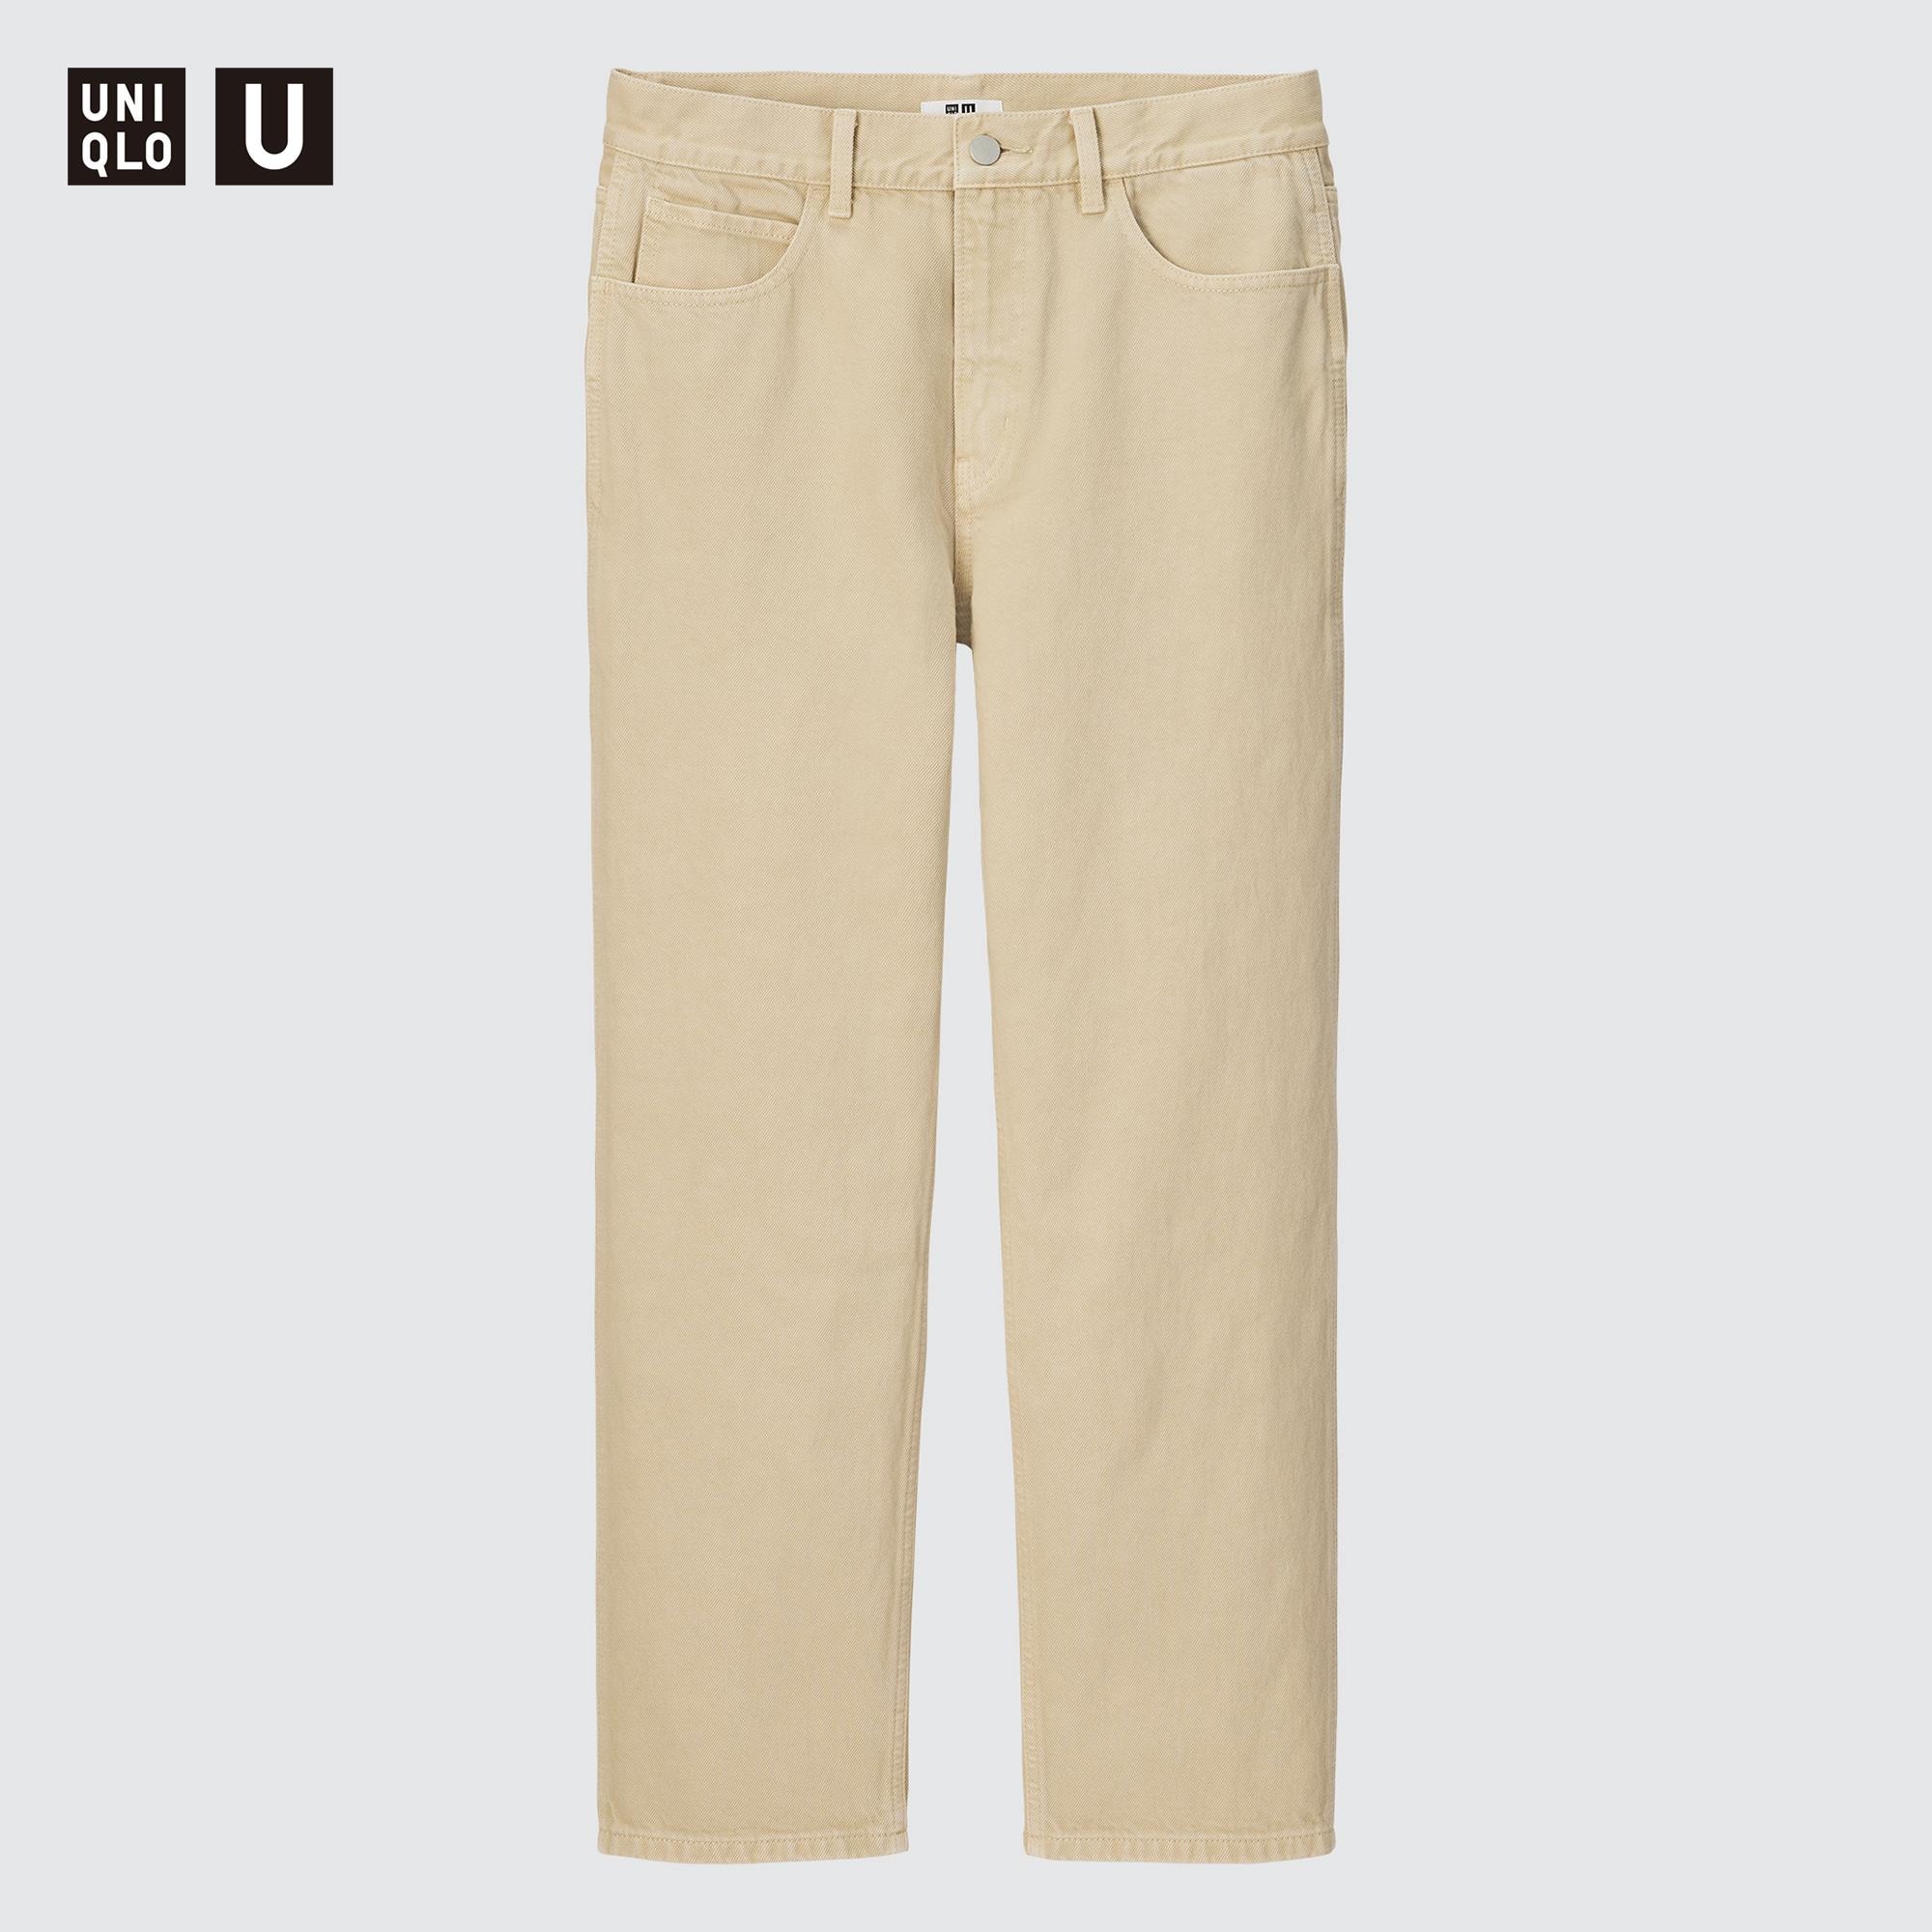 Mens Jeans Pant at Rs.400/Pcs in chennai offer by Cheap Shop E Commerce Llp